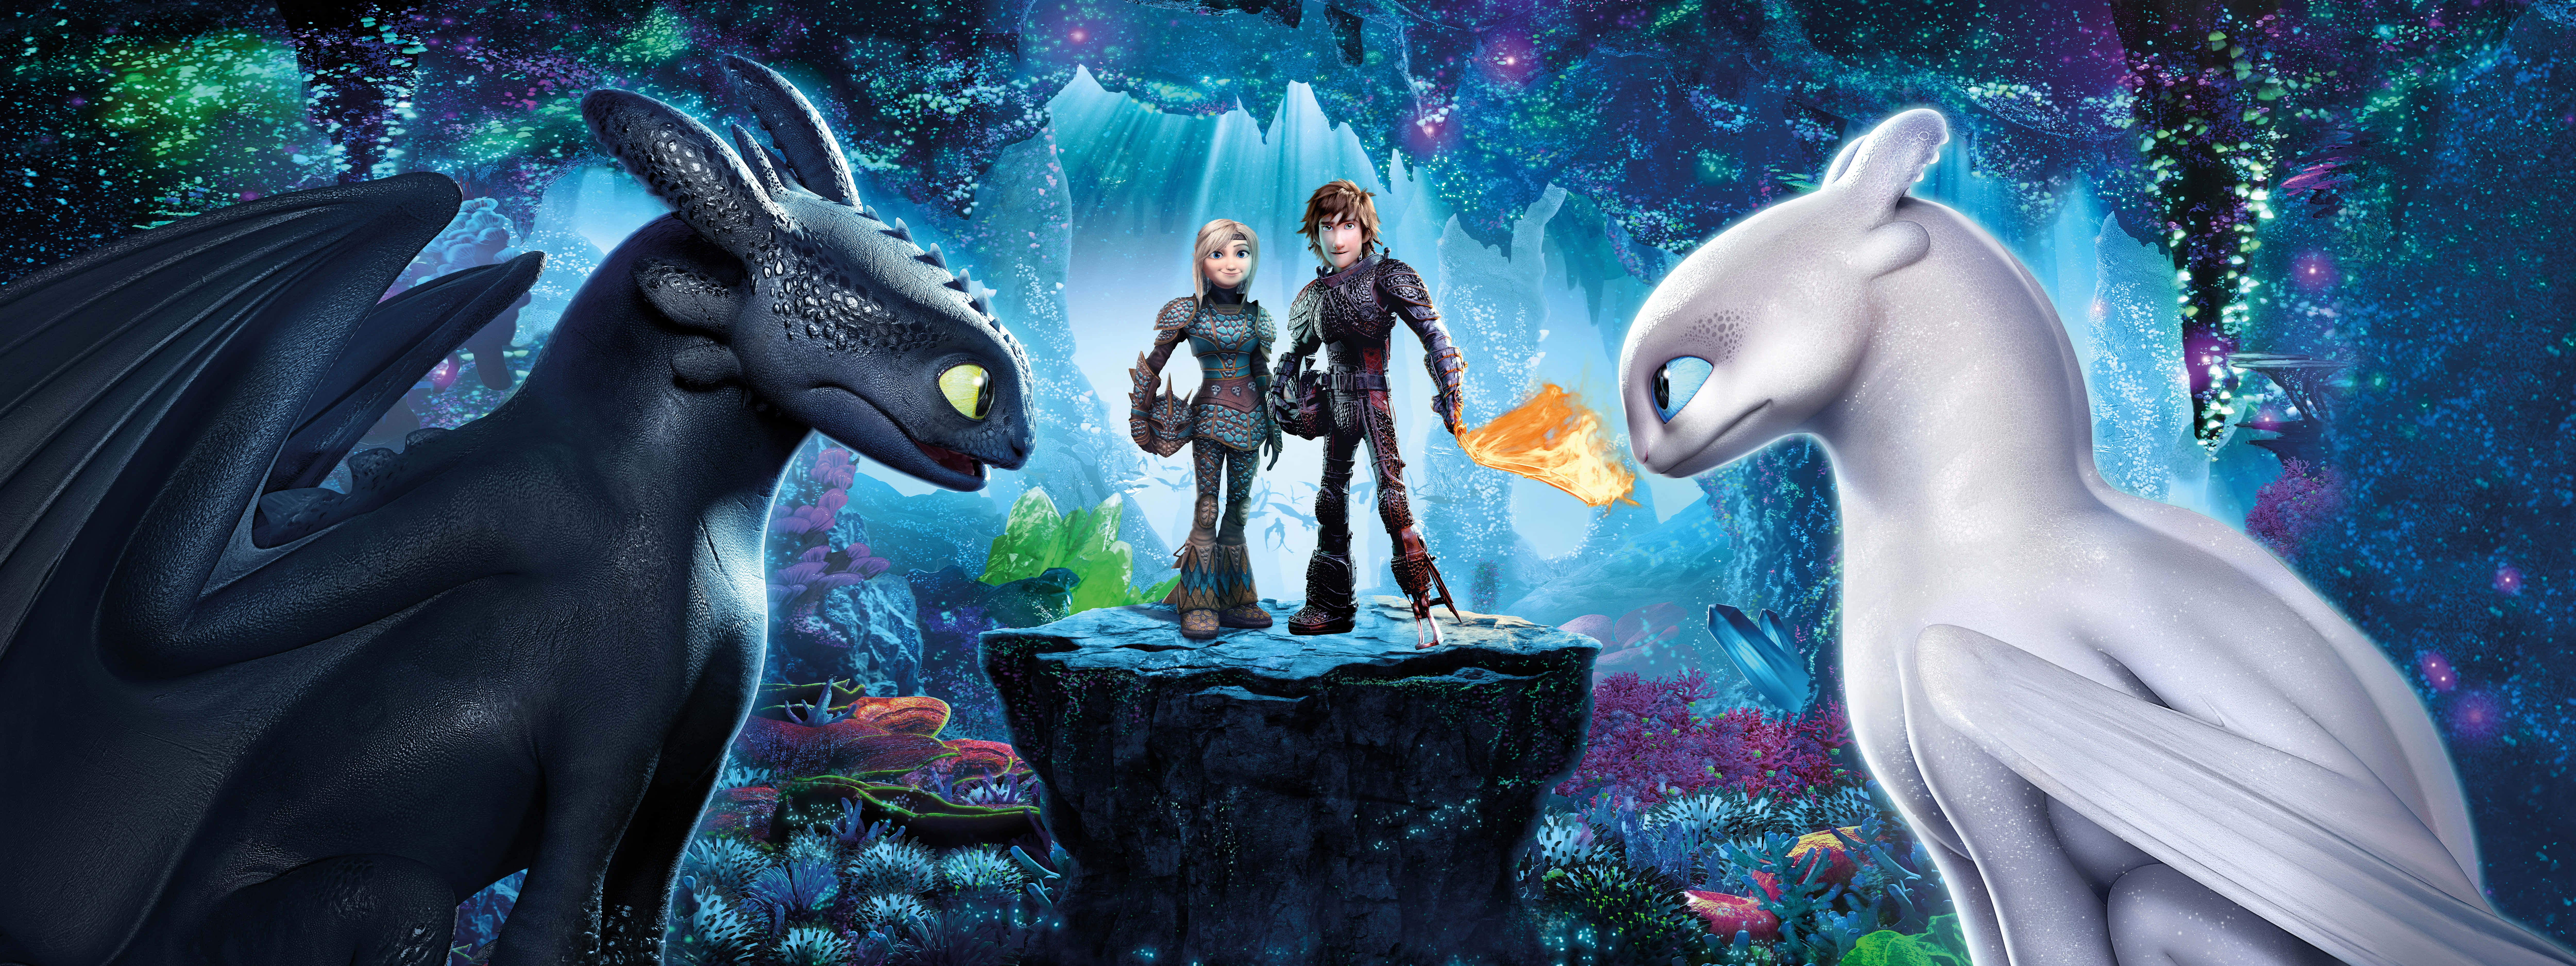 Experience the world of 'How to Train Your Dragon' in stunning 4k resolution Wallpaper